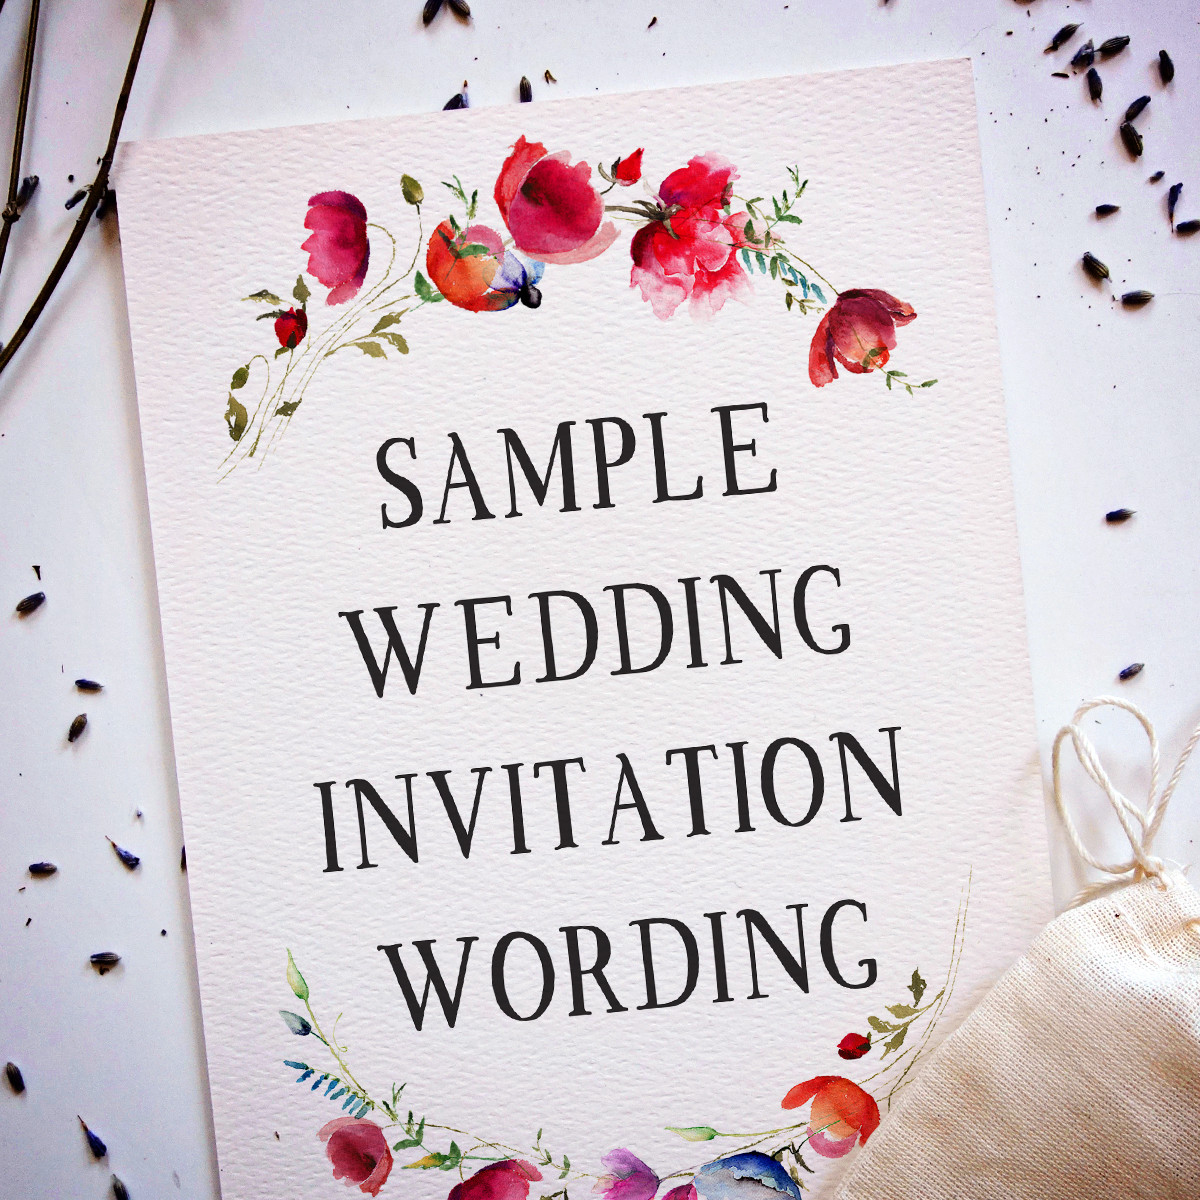 Simple Wedding Invitation Wording
 Wedding Invitation Wording Samples from Traditional to